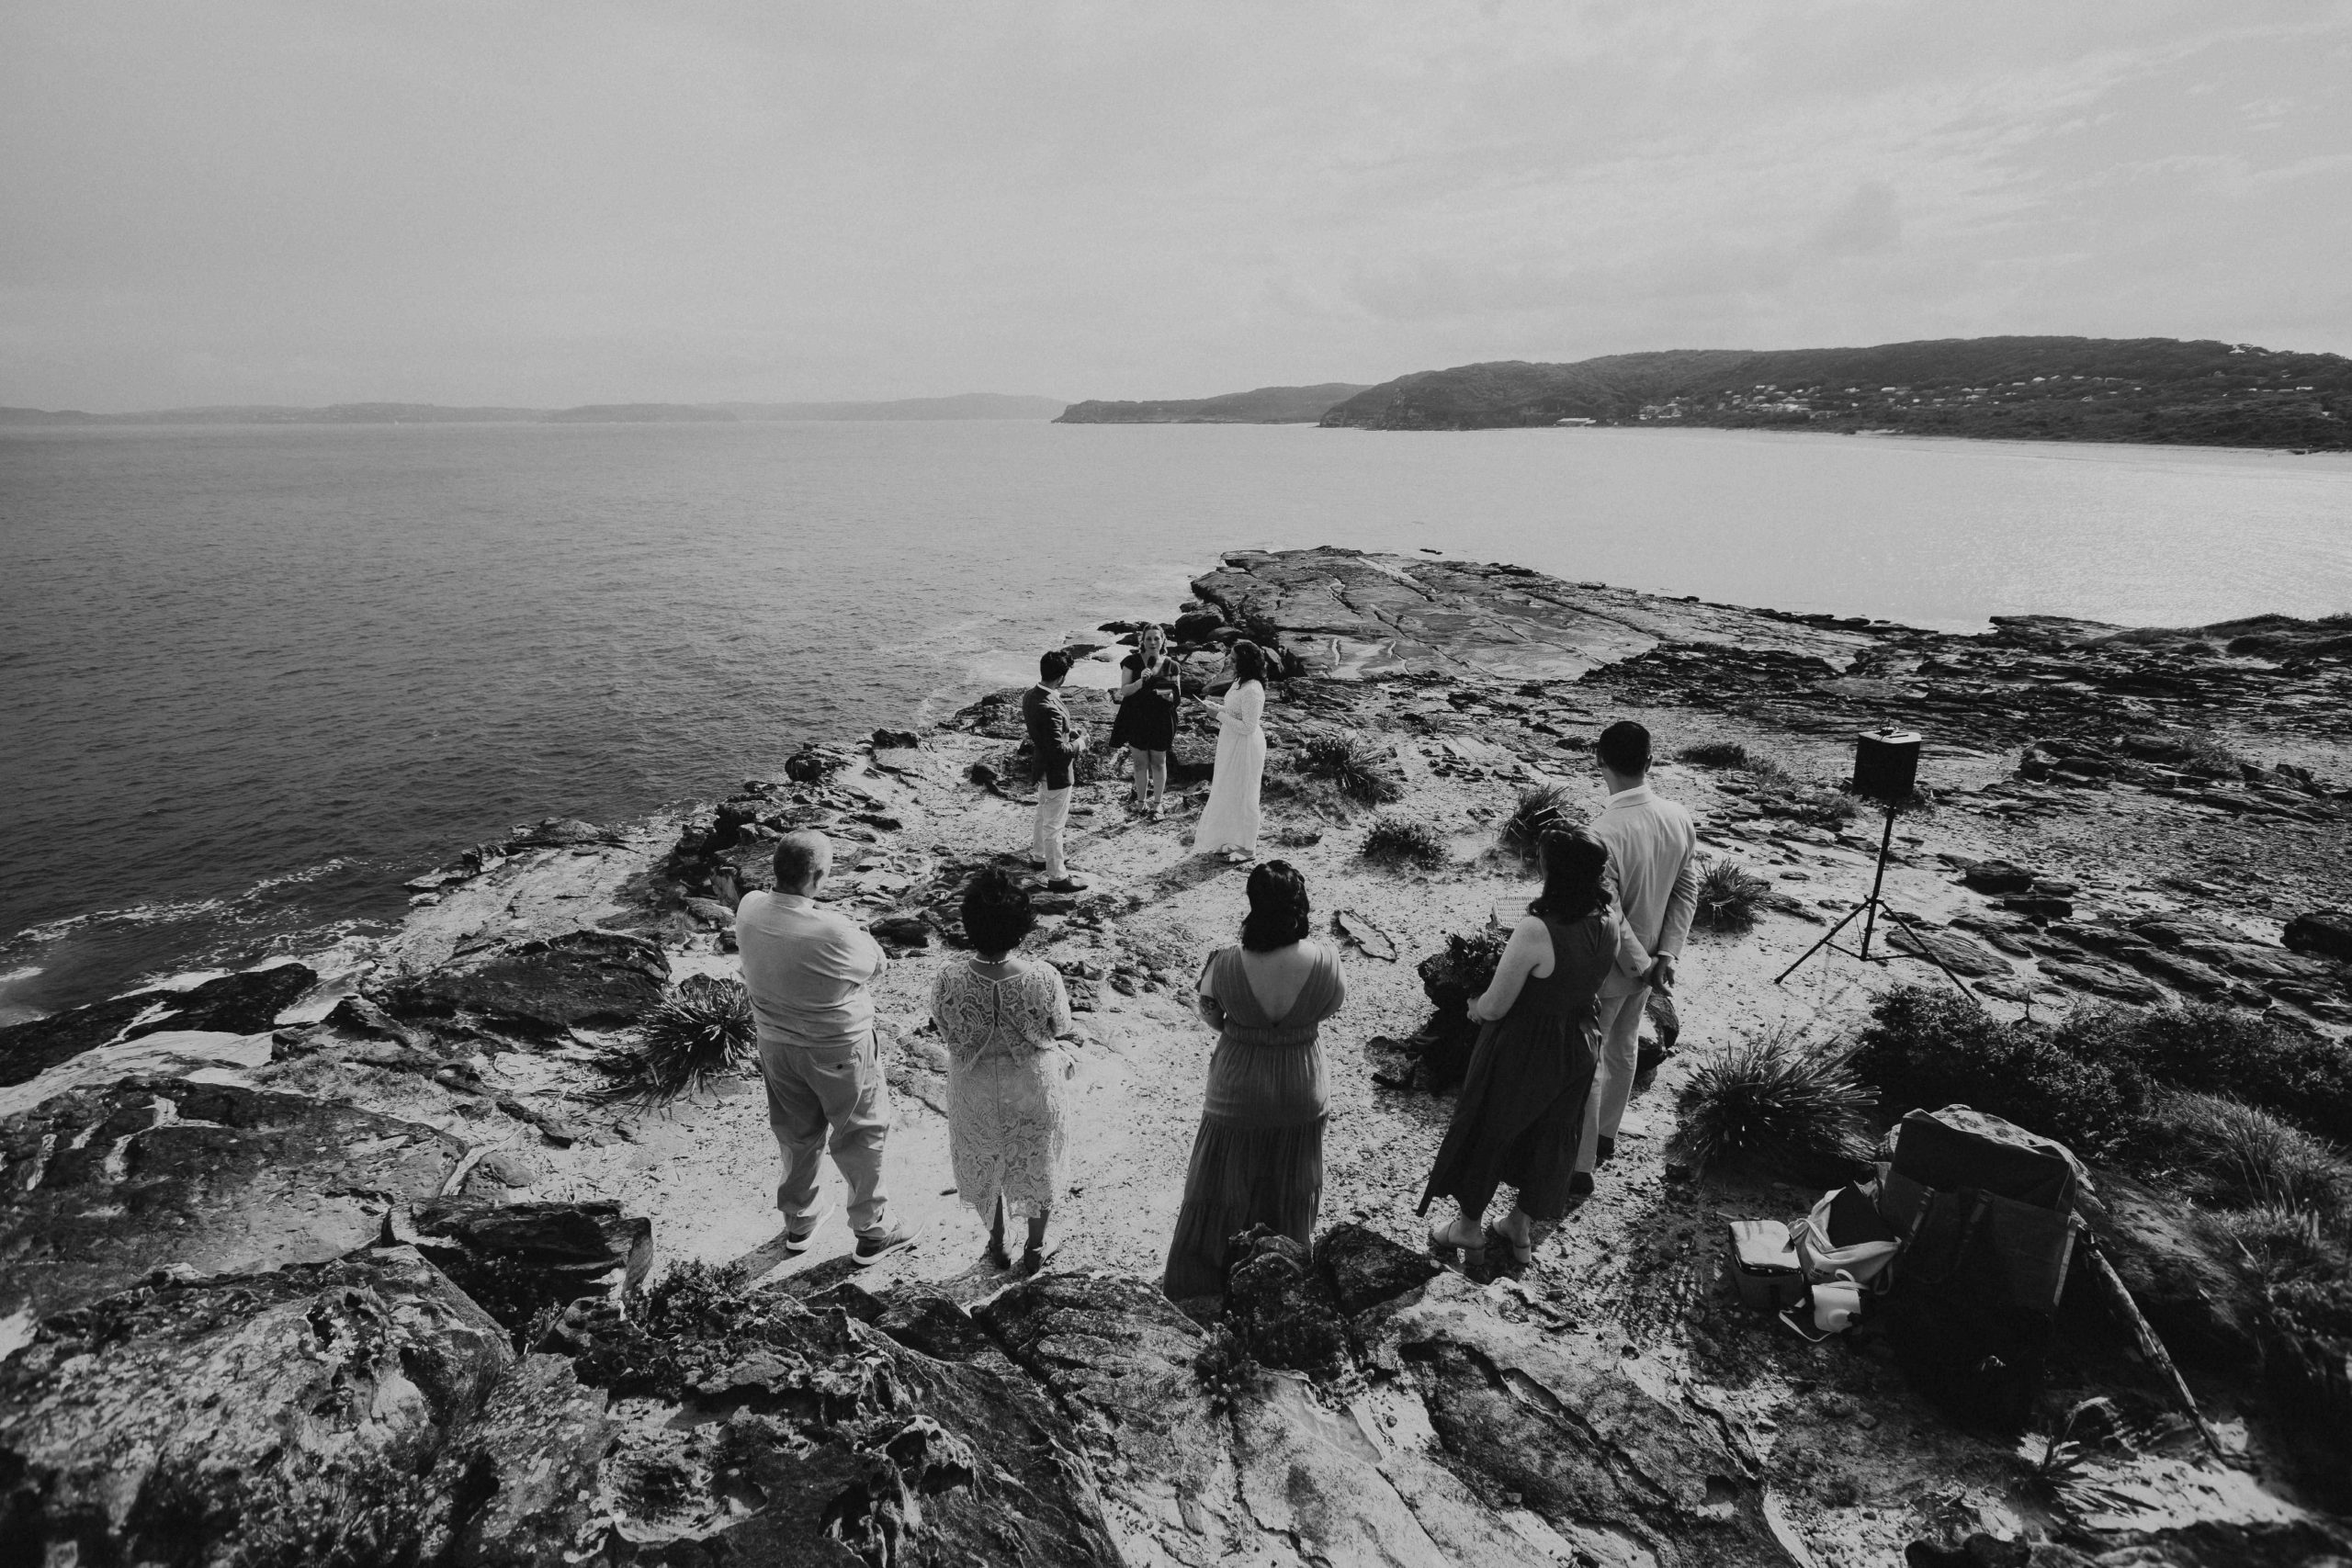 A small group of people watch on an Elopement takes place on a clifftop in Bouddi NP on the Central Coast. Black and white image